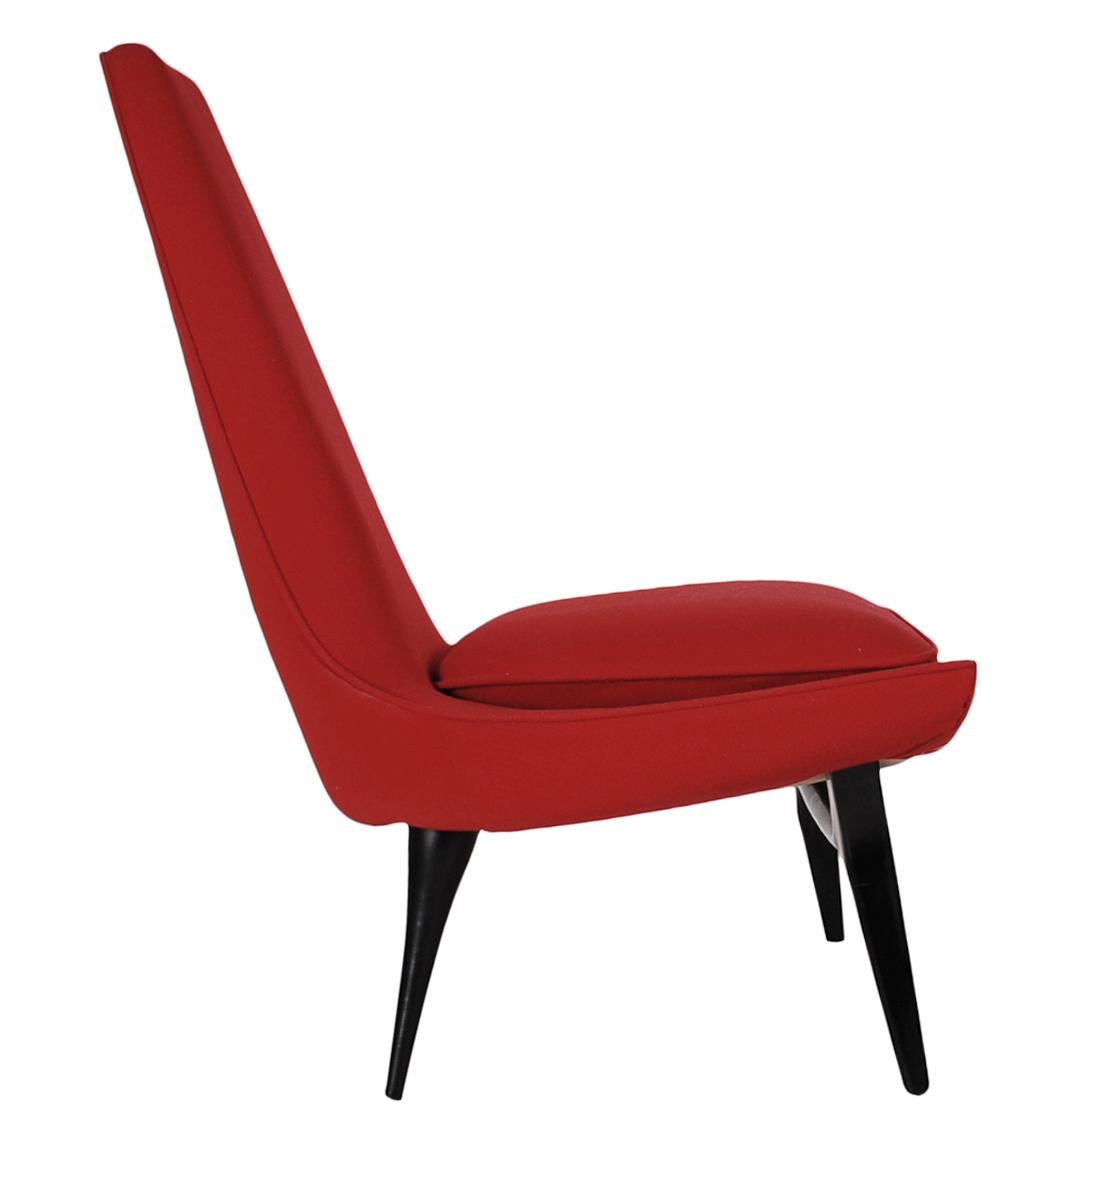 American Mid-Century Modern Sculptural Lounge Chair by Karpen of California in Red Wool